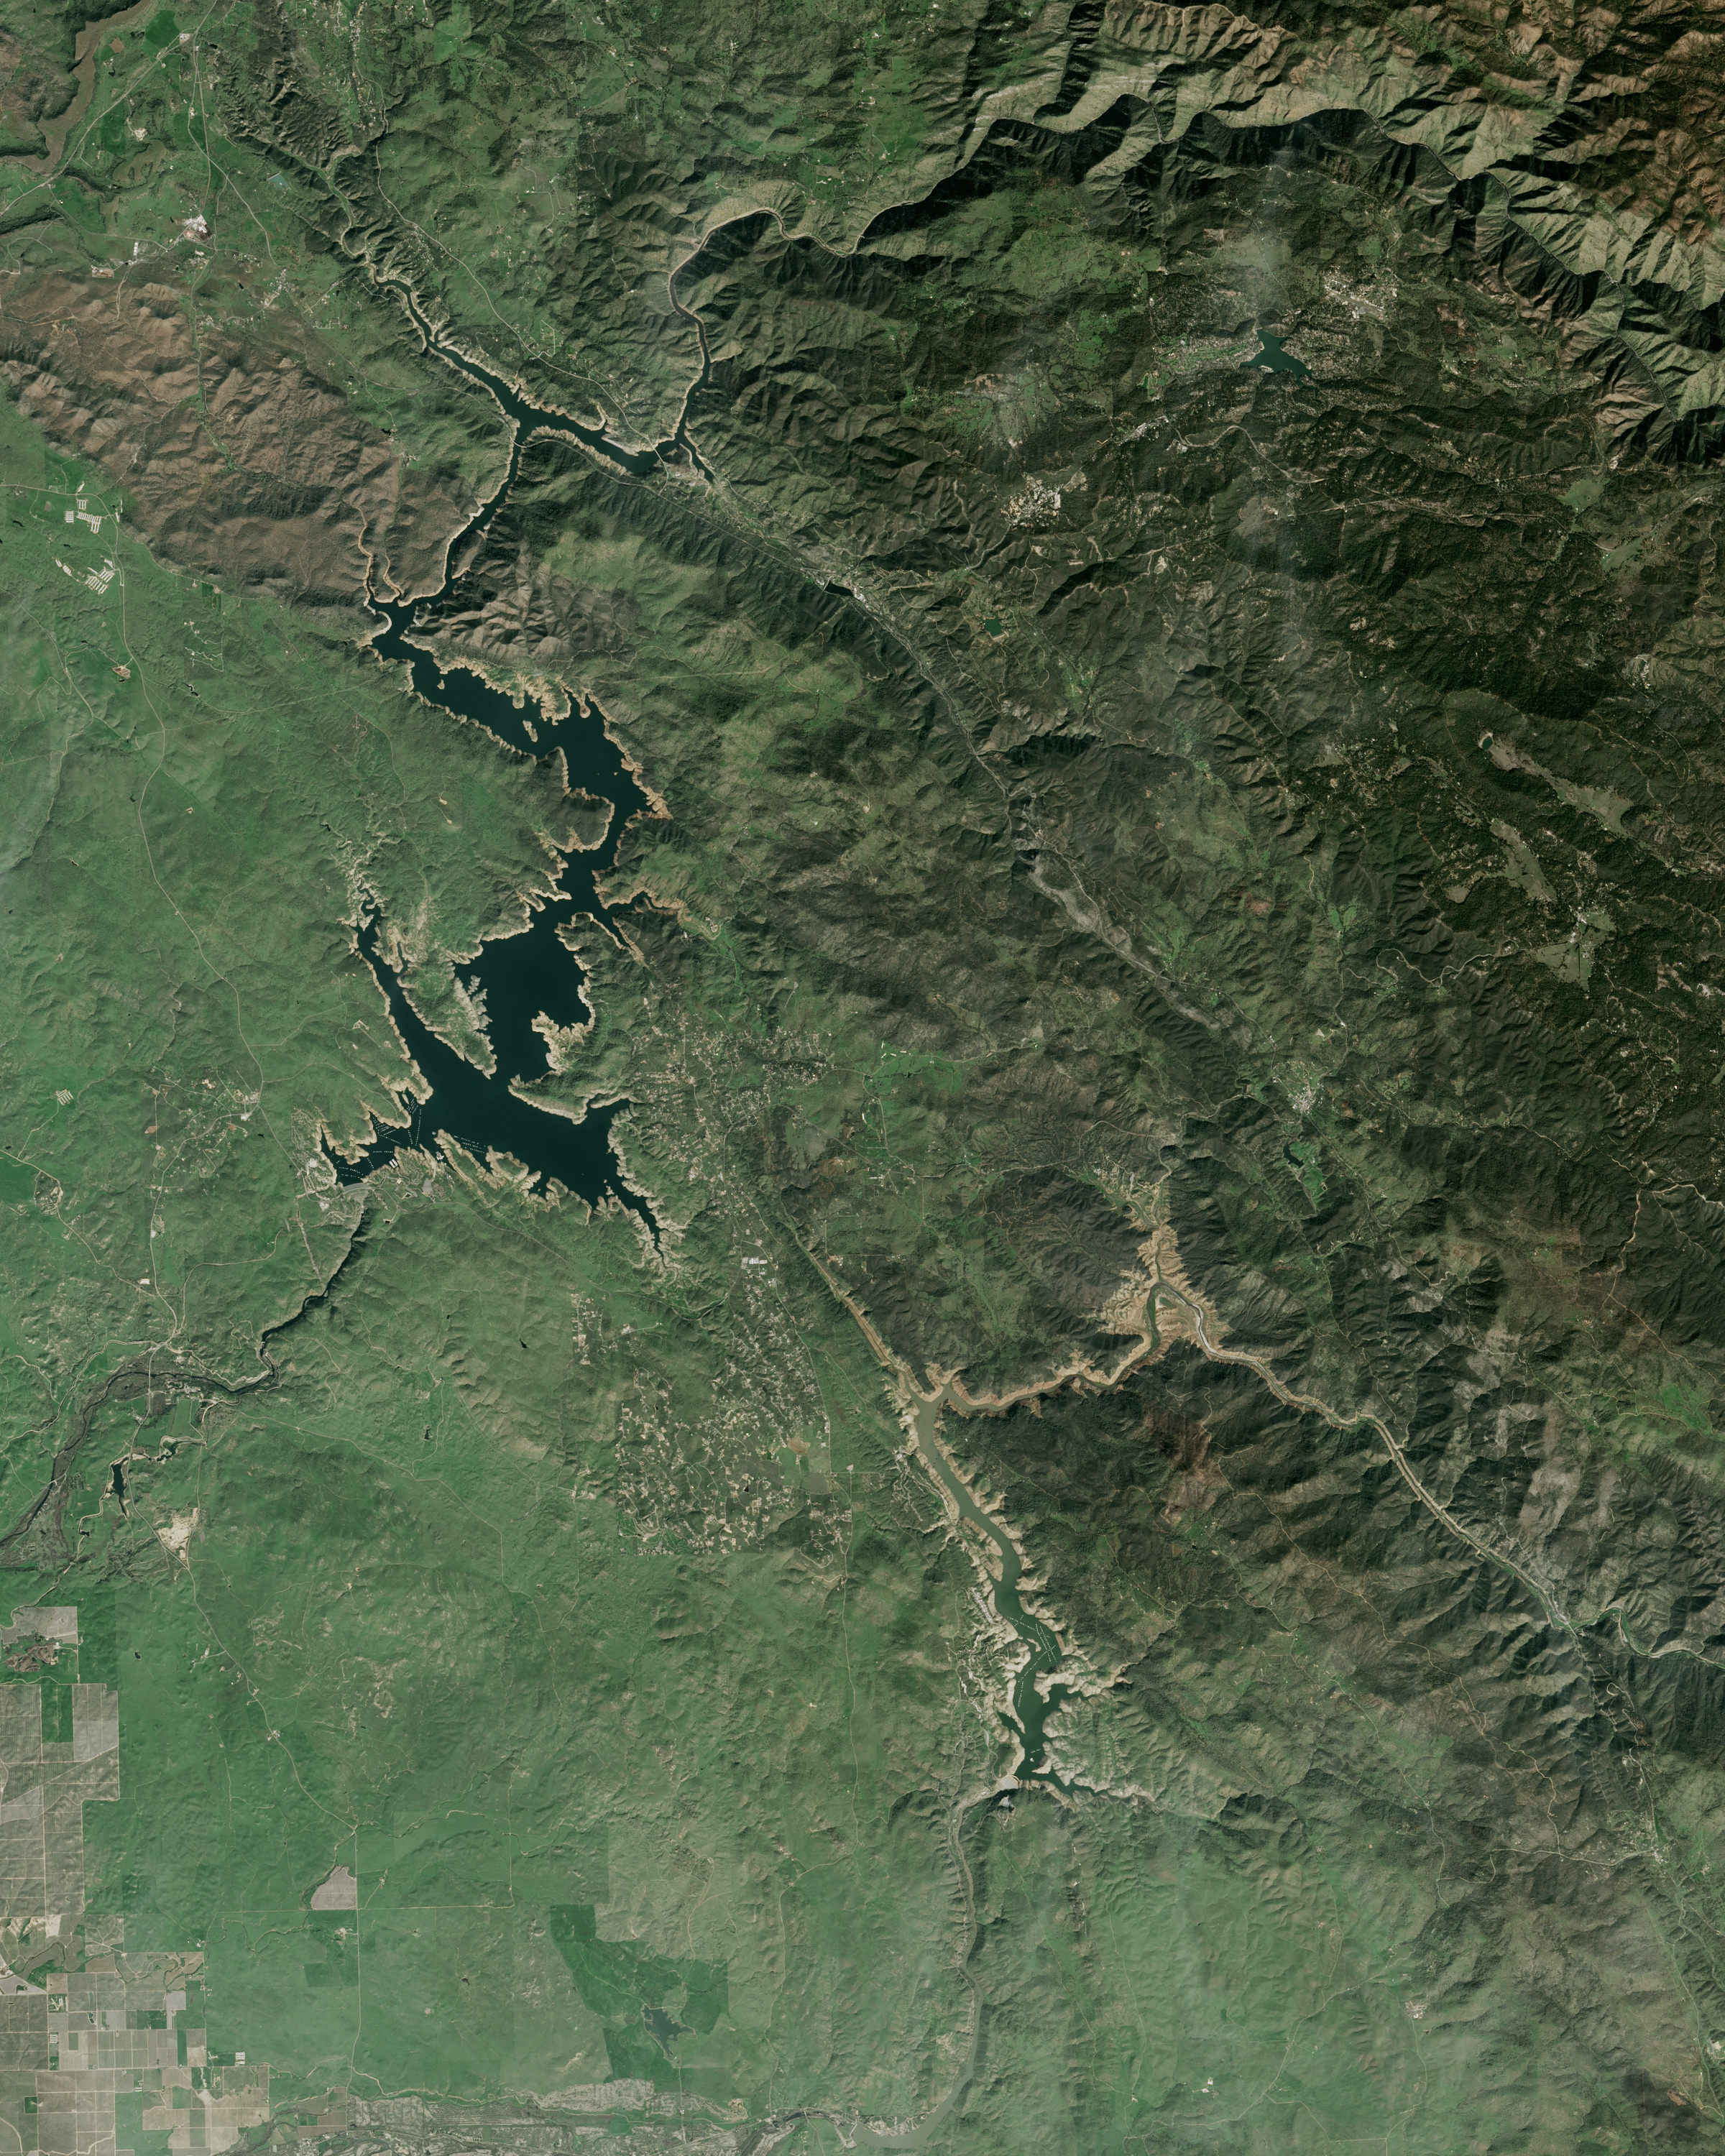 California Reservoirs Rise from Drought to Deluge - related image preview